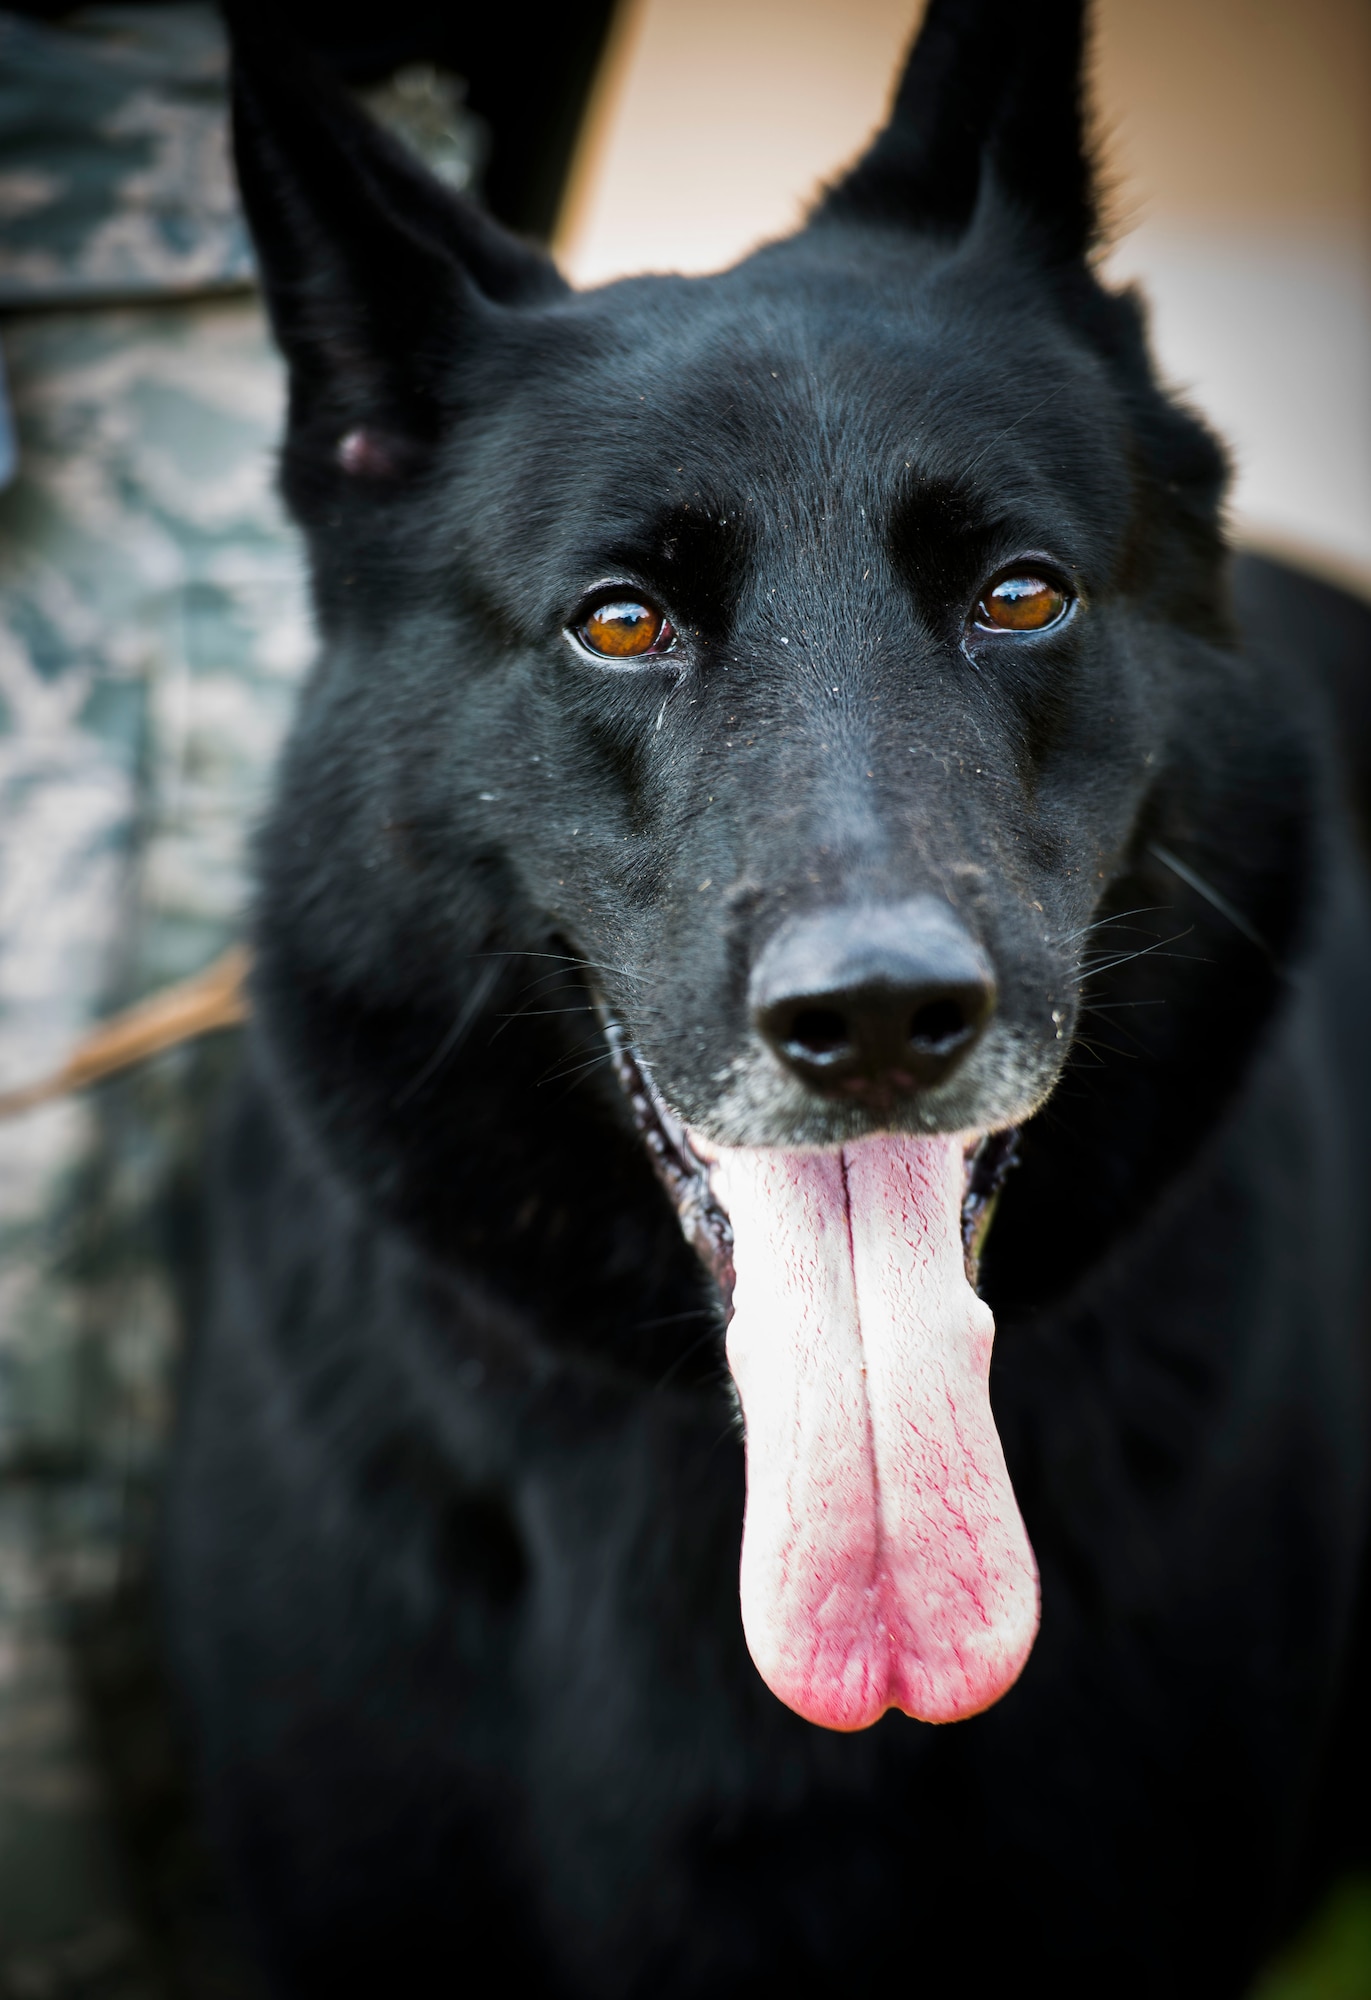 Dixie, 11th Security Support Squadron military working dog, takes a break from controlled aggression techniques at Joint Base Andrews, Md., July 29, 2015. Controlled aggression techniques are part of routine training for all K-9s to remain proficient and healthy. (U.S. Air Force photo by Staff Sgt. Chad C. Strohmeyer)(Released)